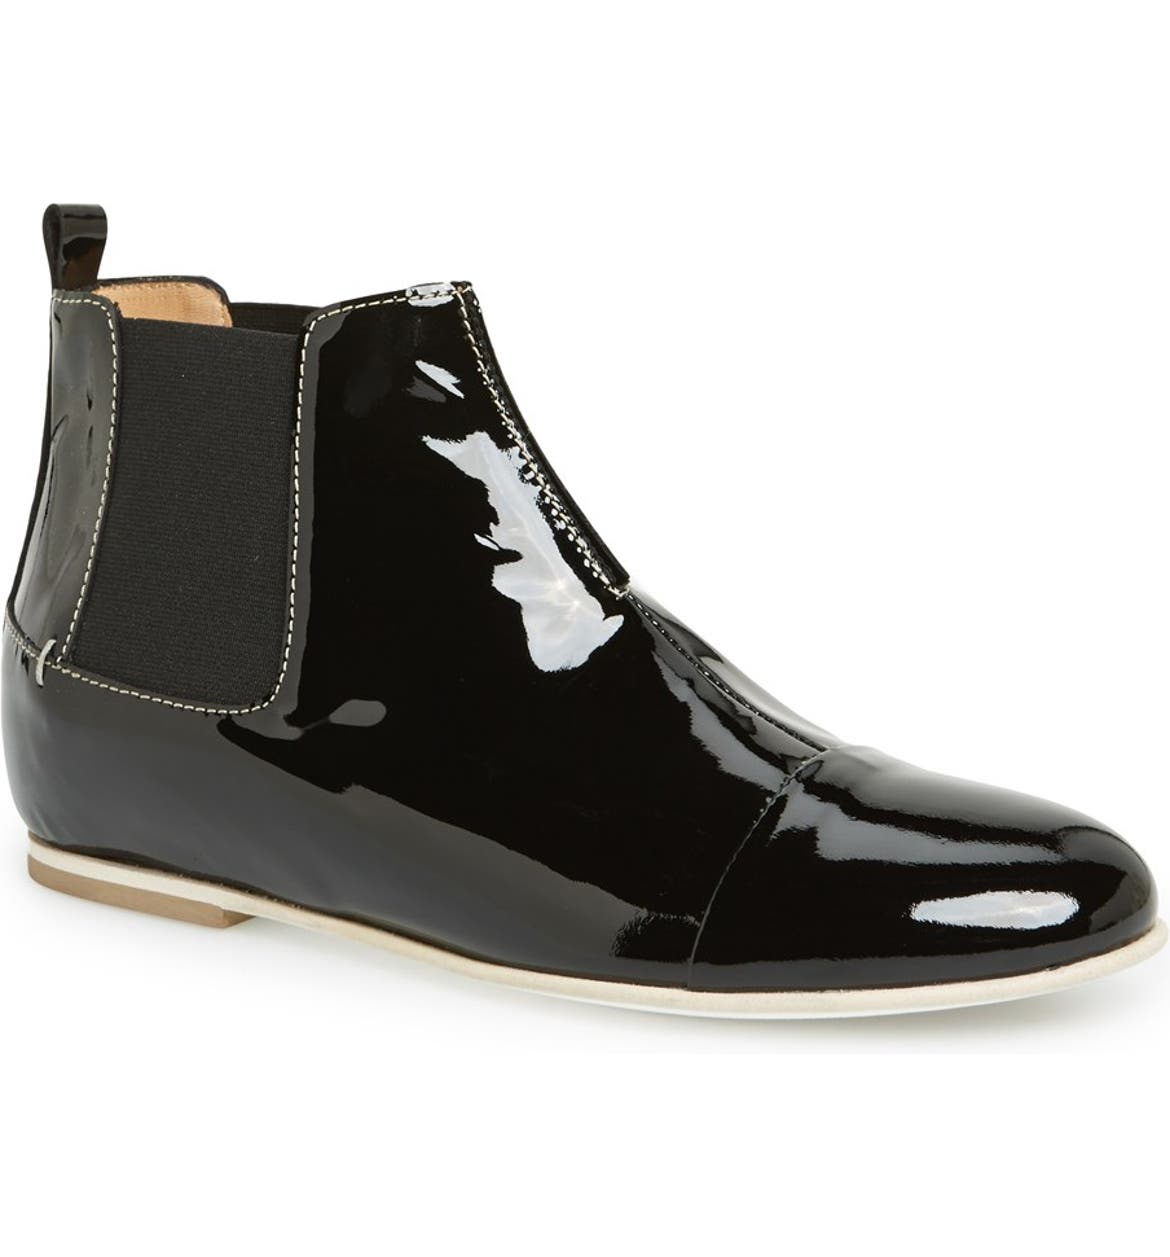 Aquatalia by Marvin K. 'Chime' Weatherproof Patent Leather Chelsea Boot ...